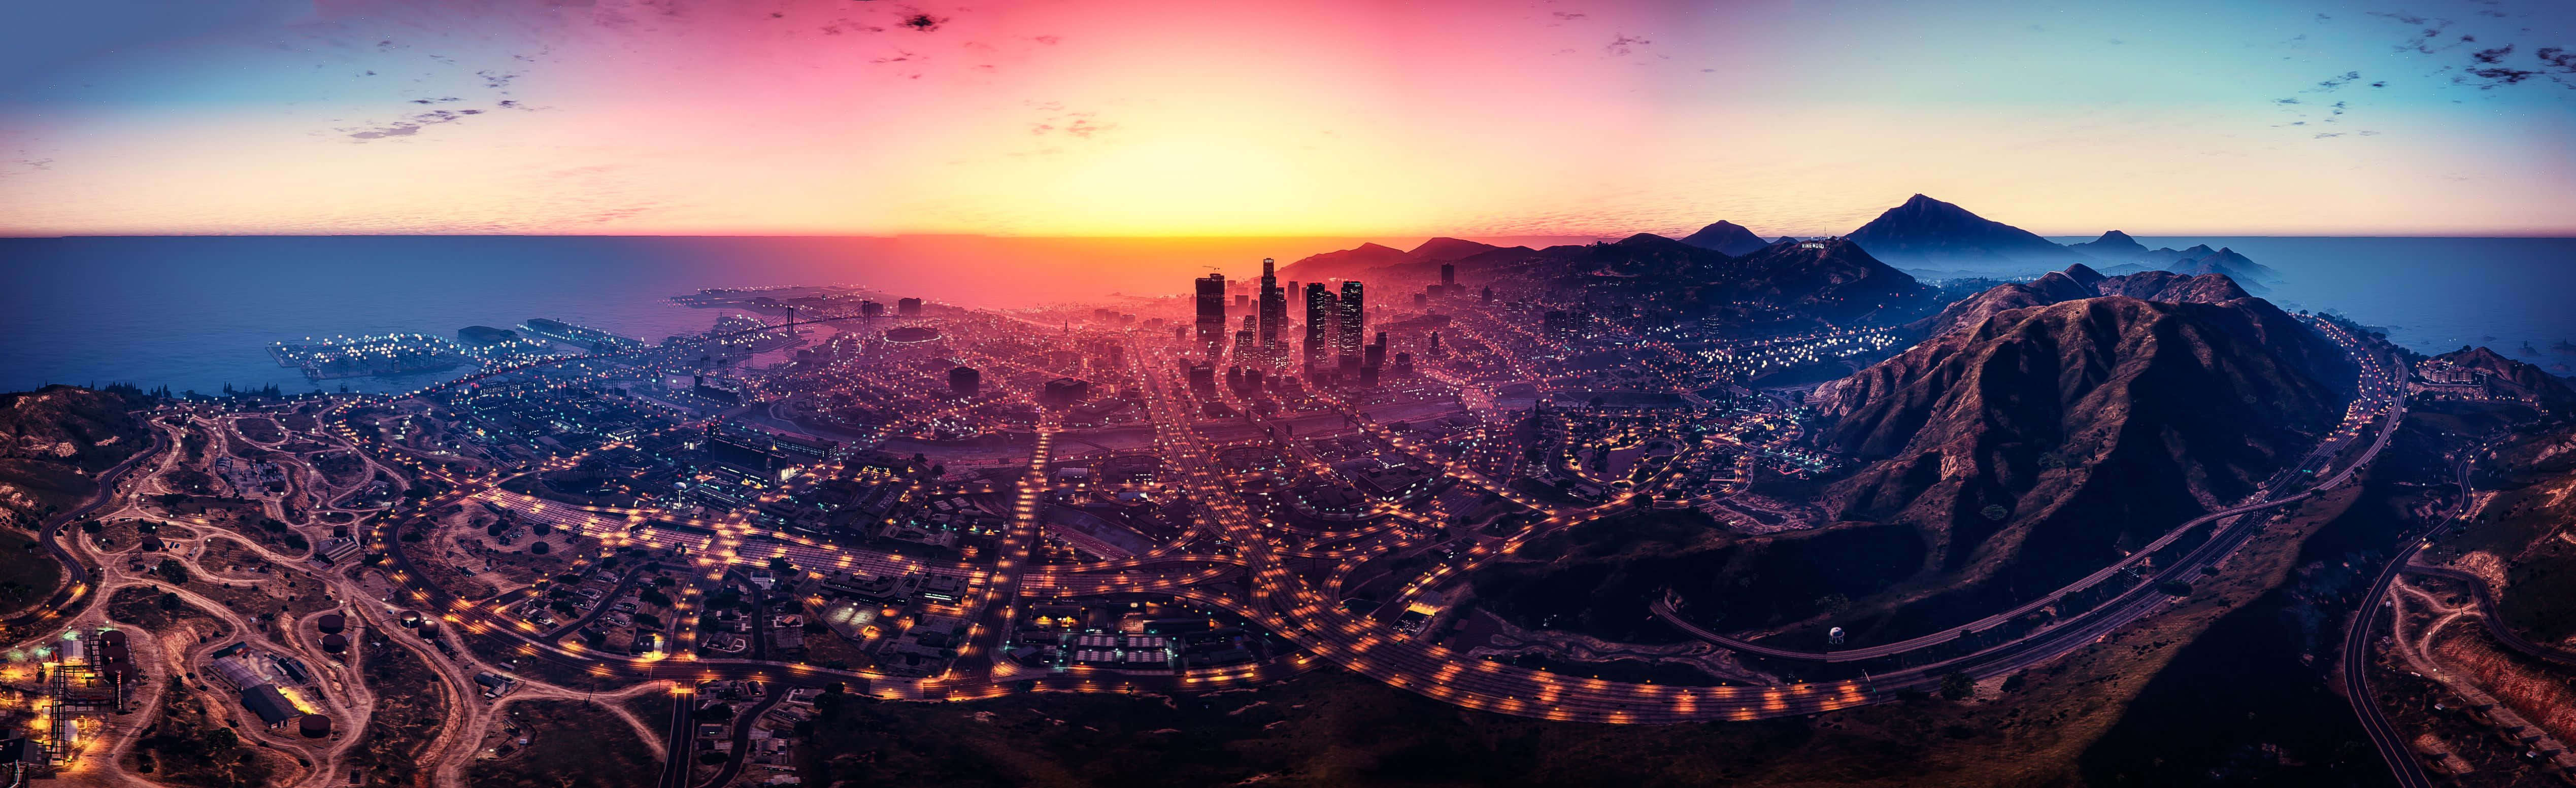 Wallpaper  Core Roleplay Grand Theft Auto Grand Theft Auto V  roleplaying FiveM 1920x1080  Hanako  1854779  HD Wallpapers  WallHere